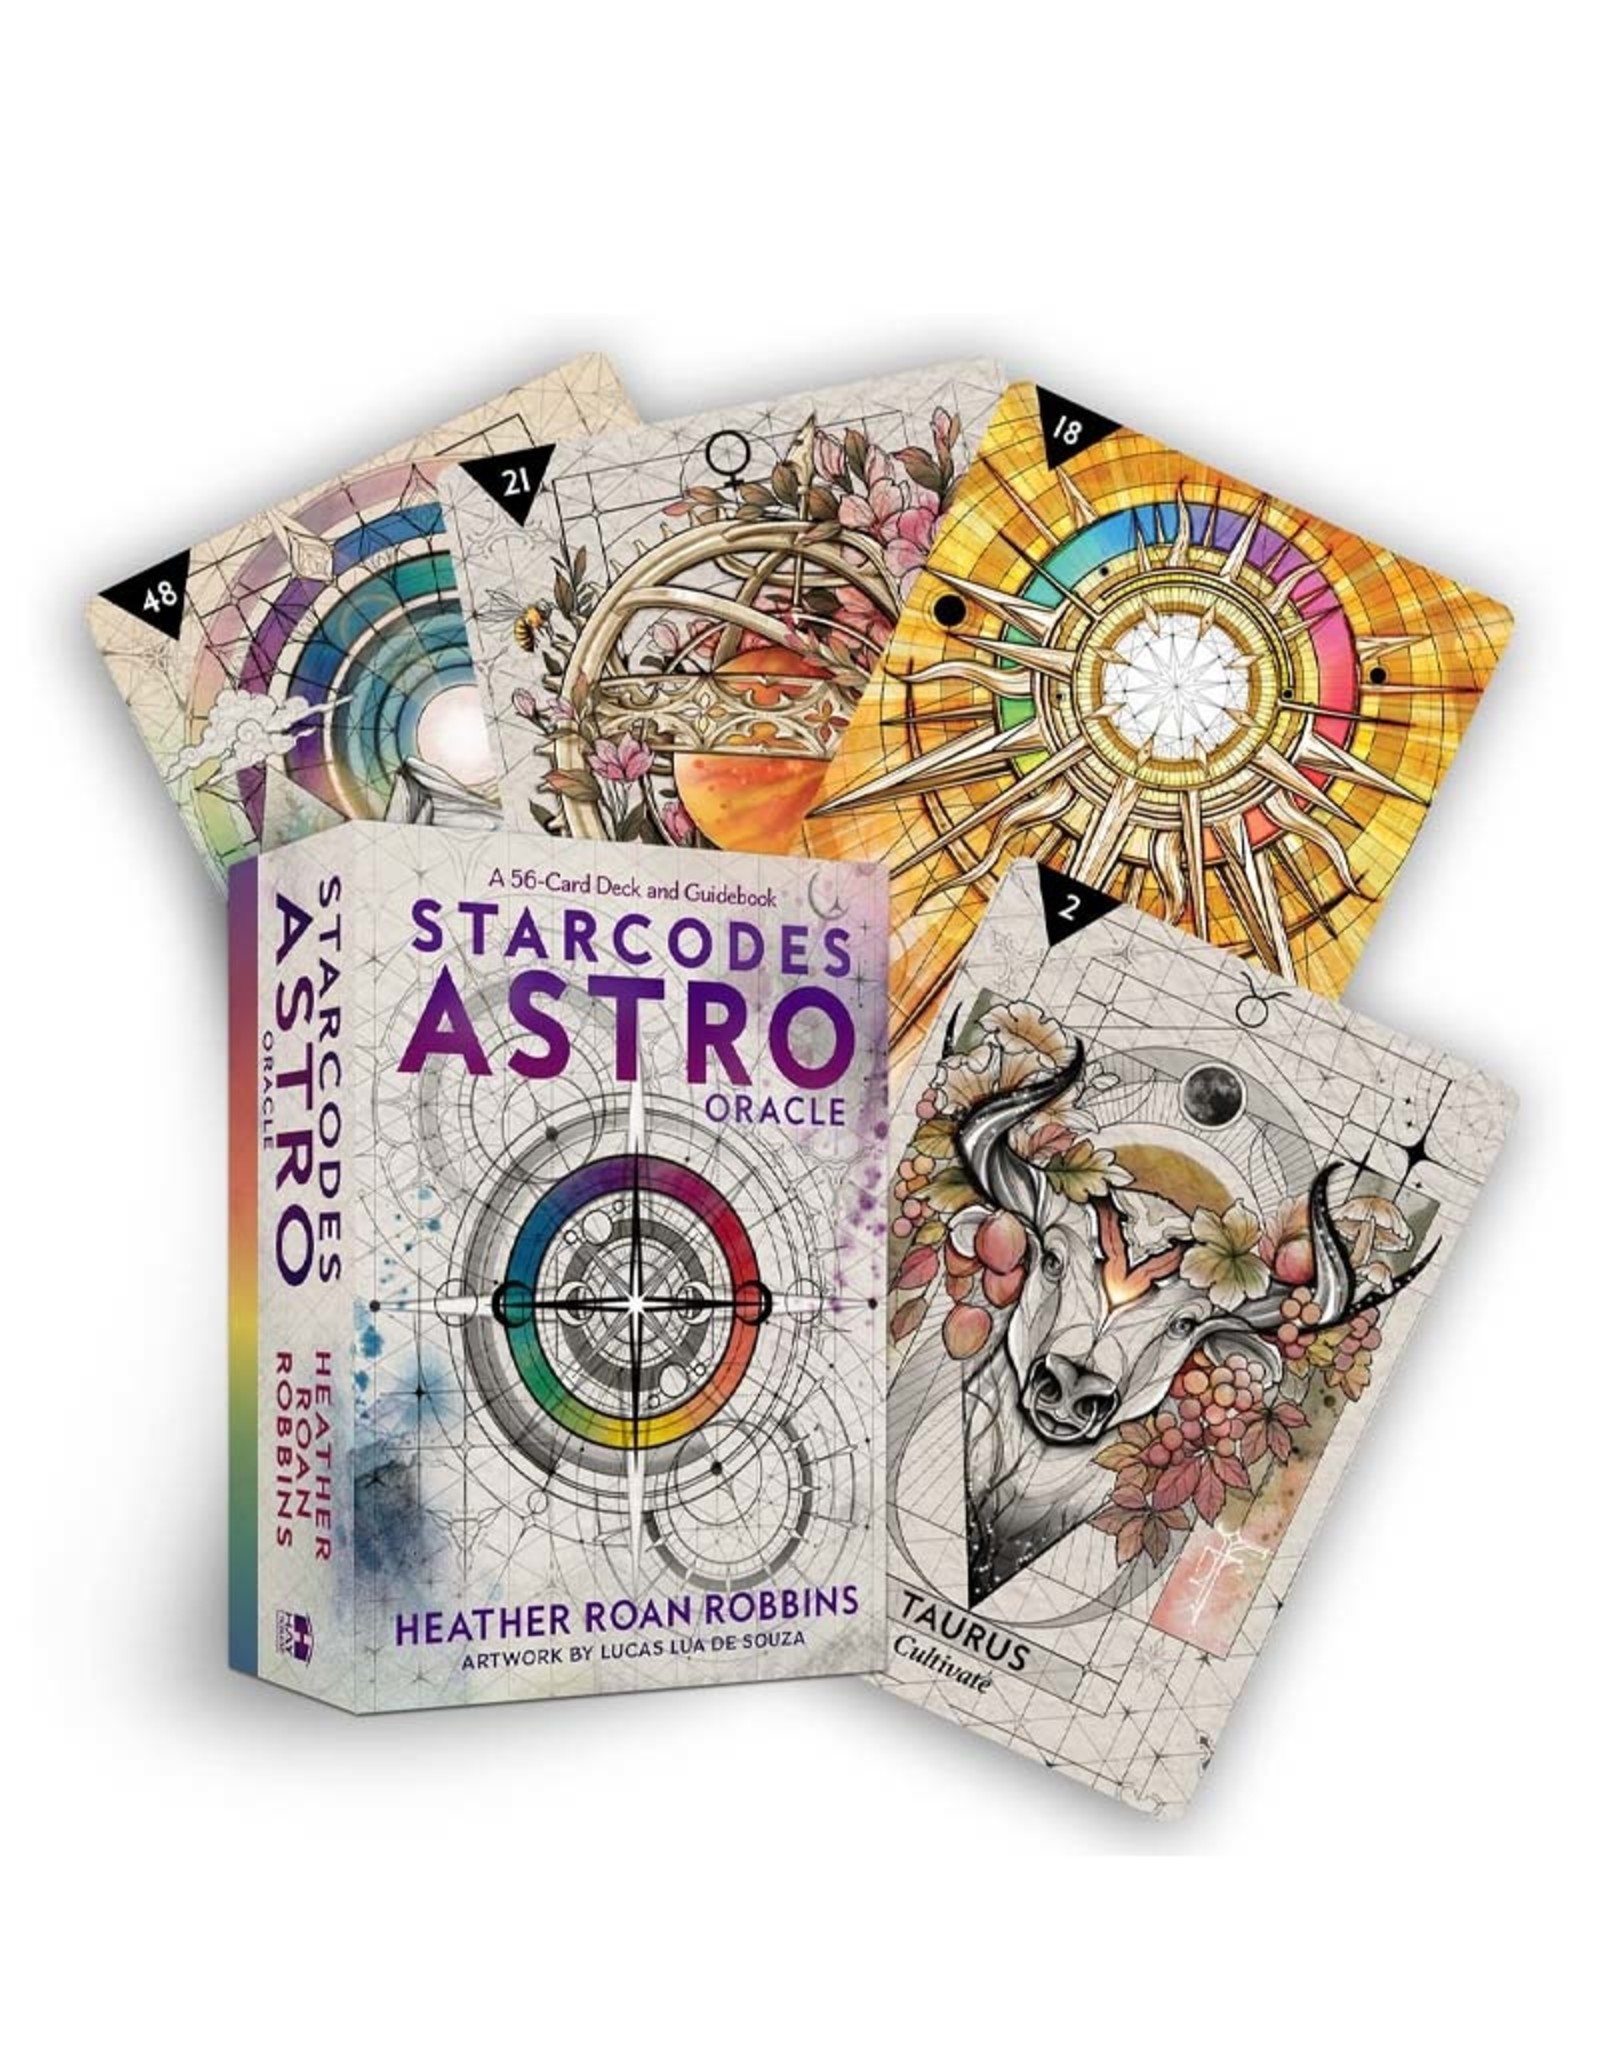 Heather Roan Robbins Starcodes Astro Oracle by Heather Roan Robbins